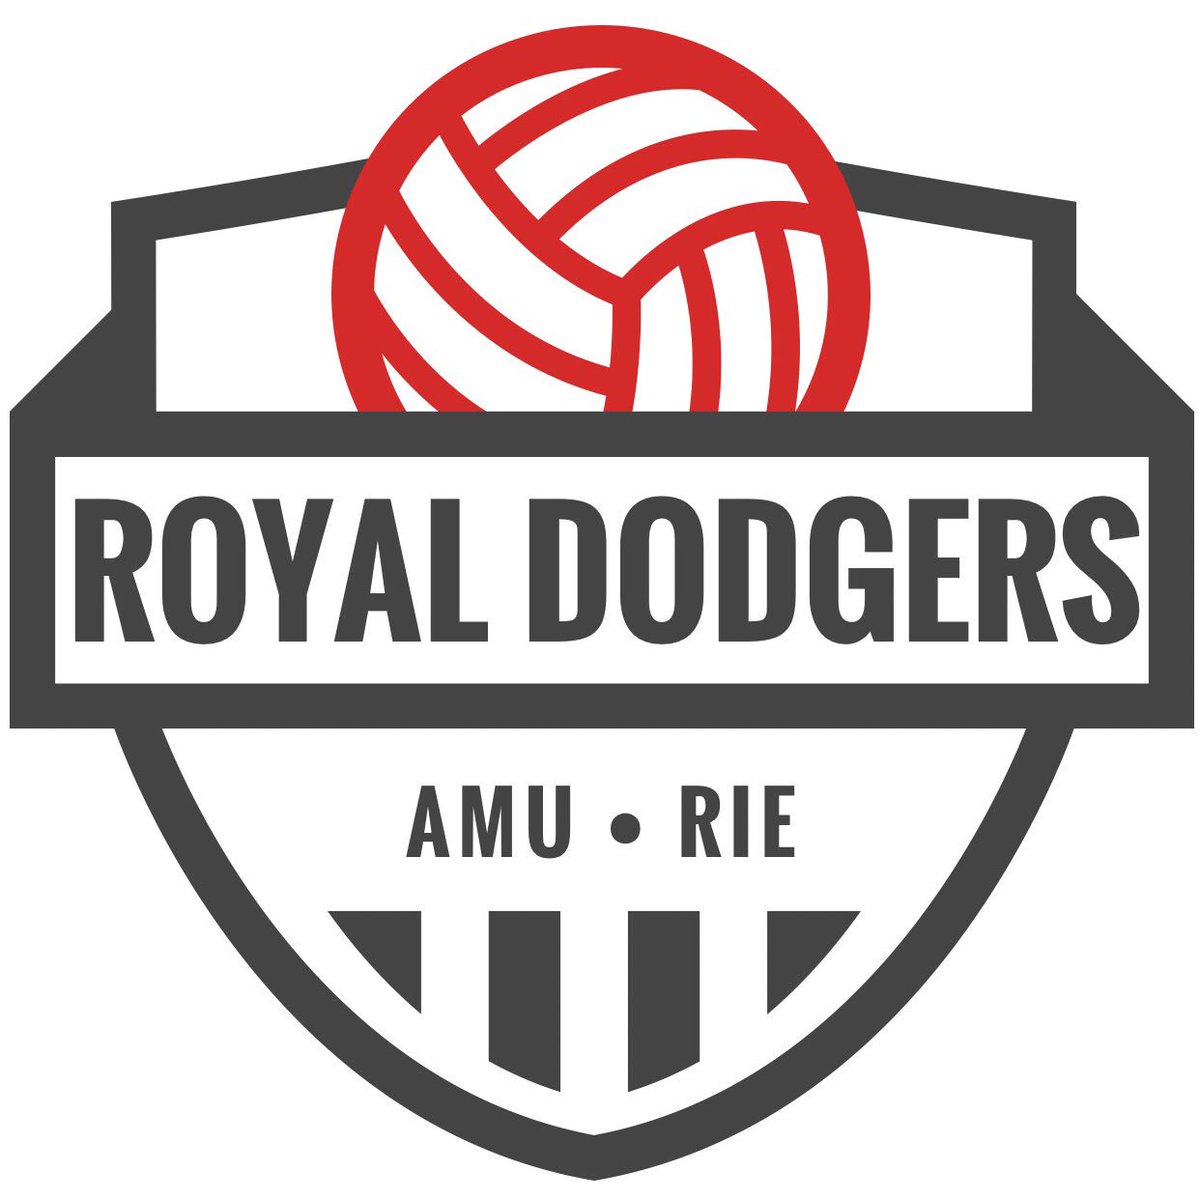 Introducing the dodgeball team to rival all others, the Royal Dodgers!! We play to win!! @AcuteRie @StJohns_ED @jenwatters74 #dodgeball #sports #healthcare #teambuilding #nhs